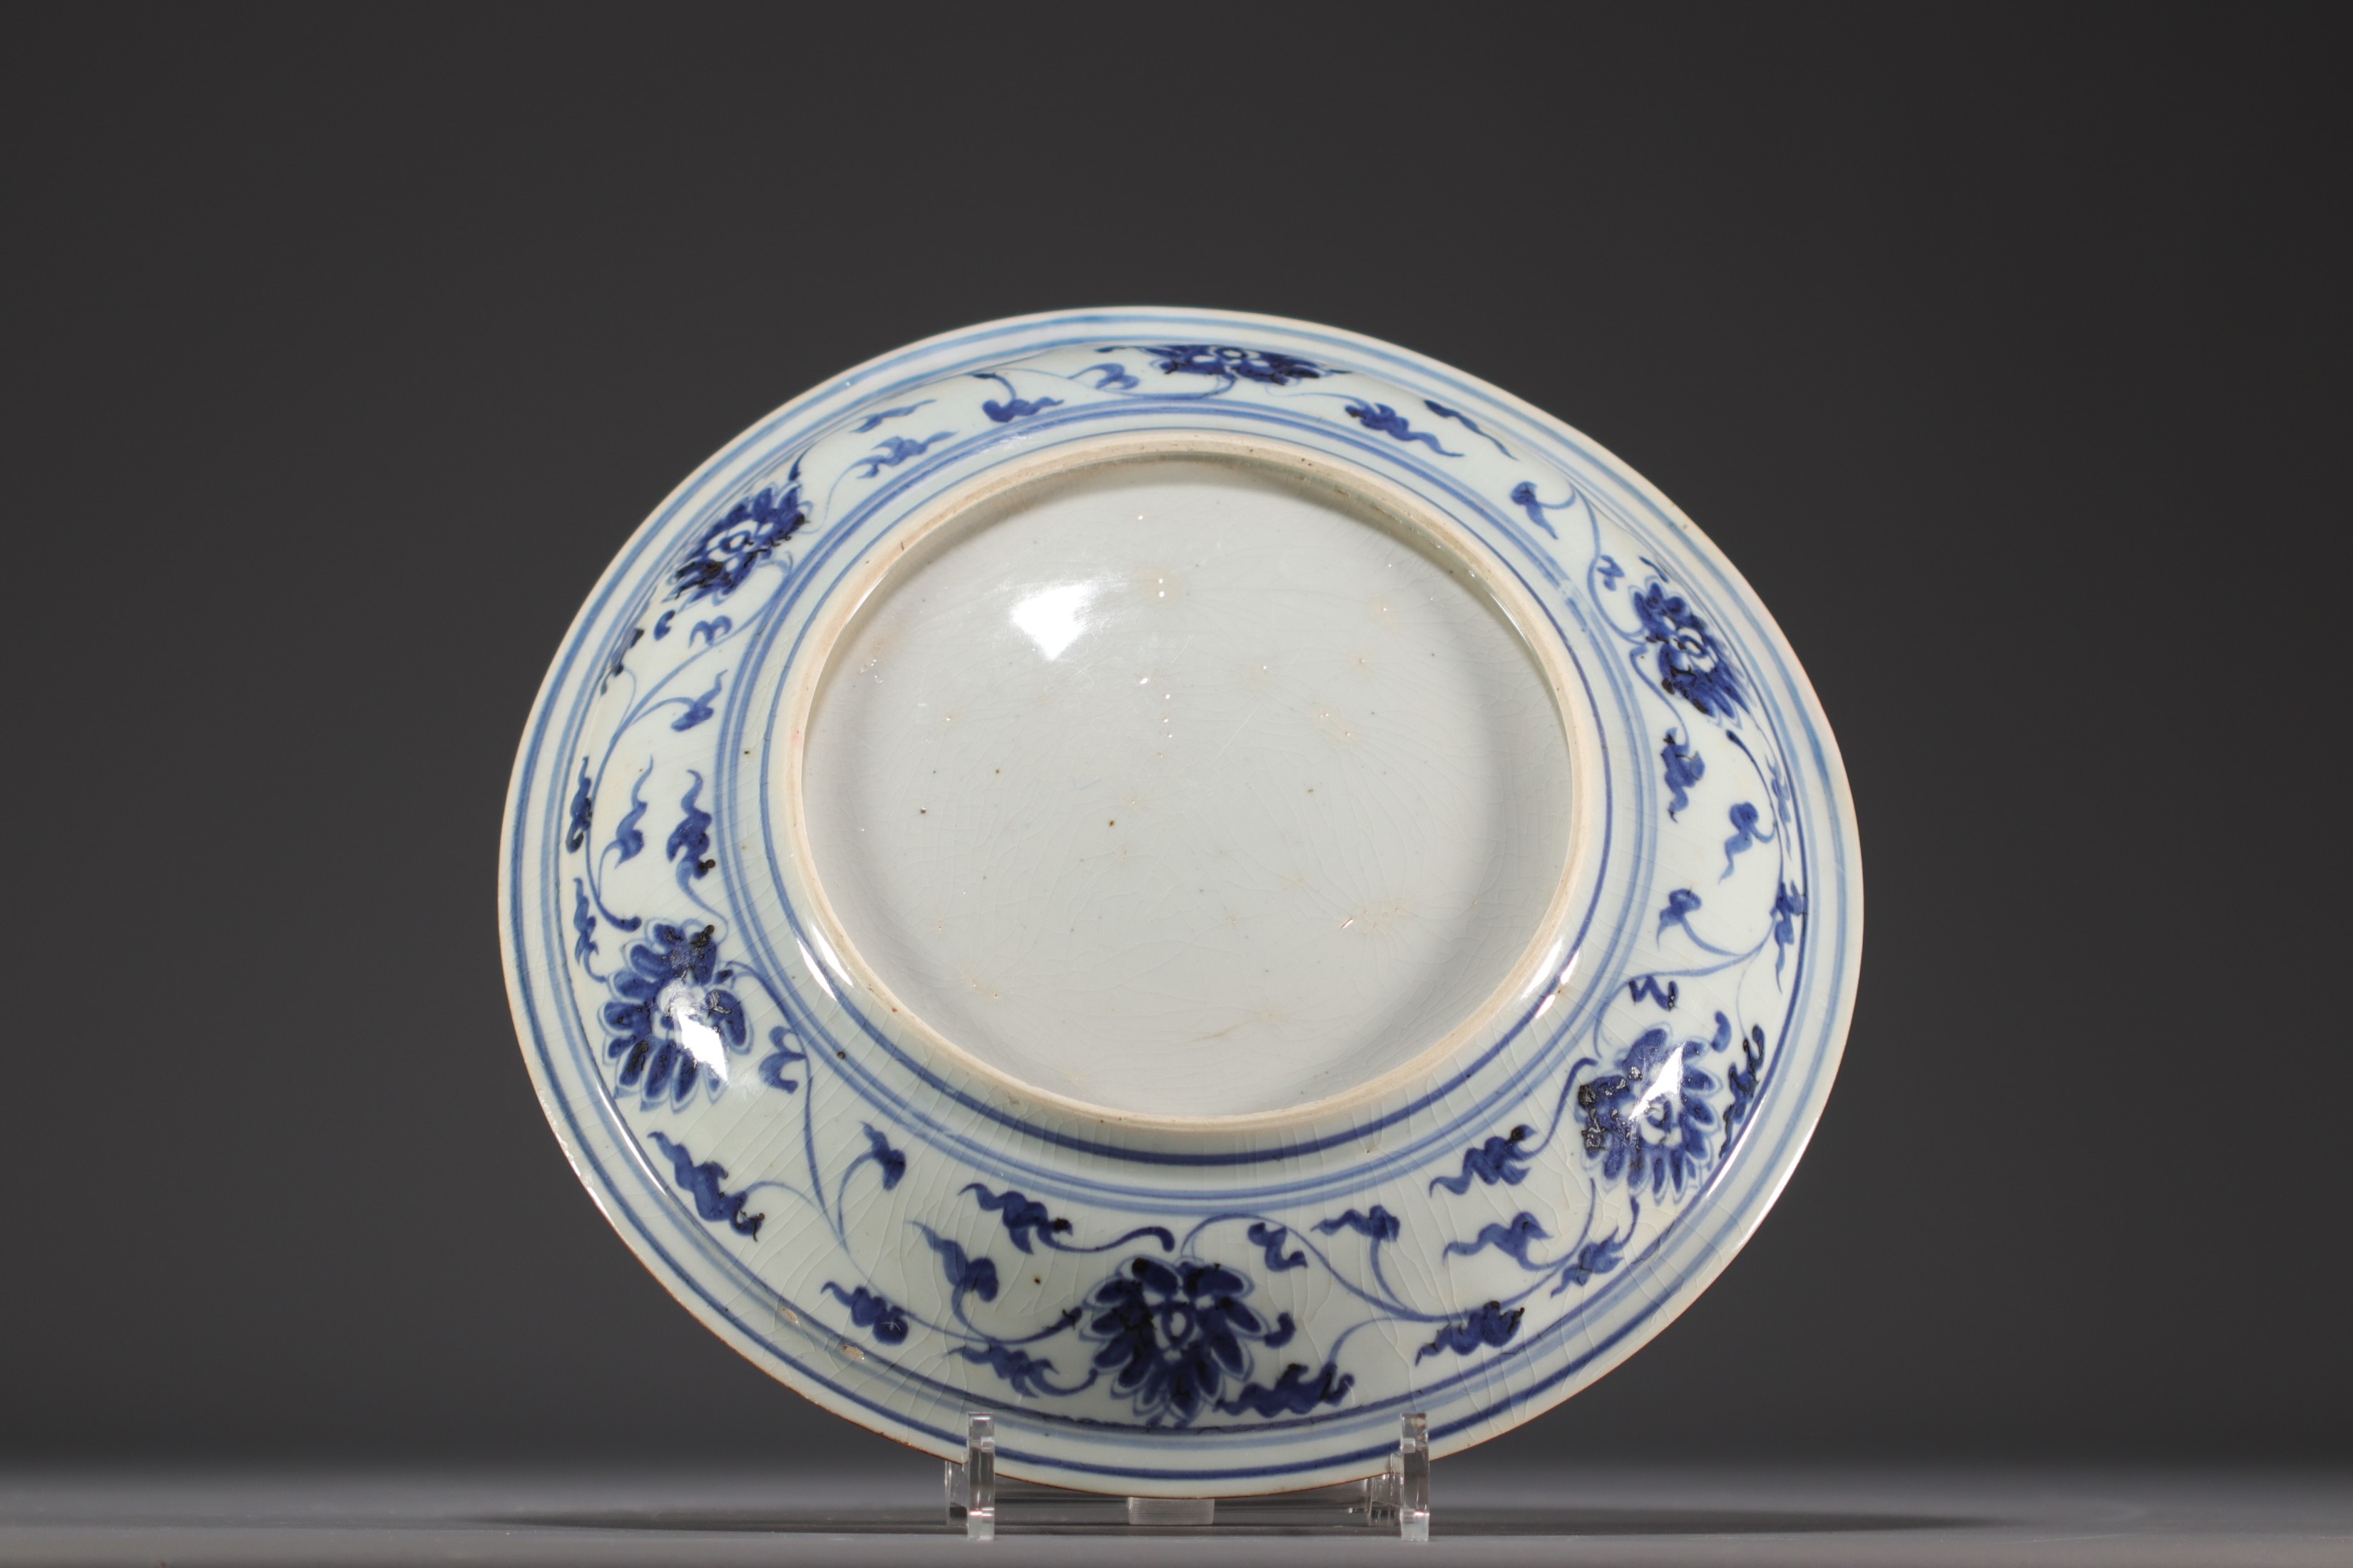 China - Rare blue-white porcelain plate with goat design, Ming period. - Image 2 of 2